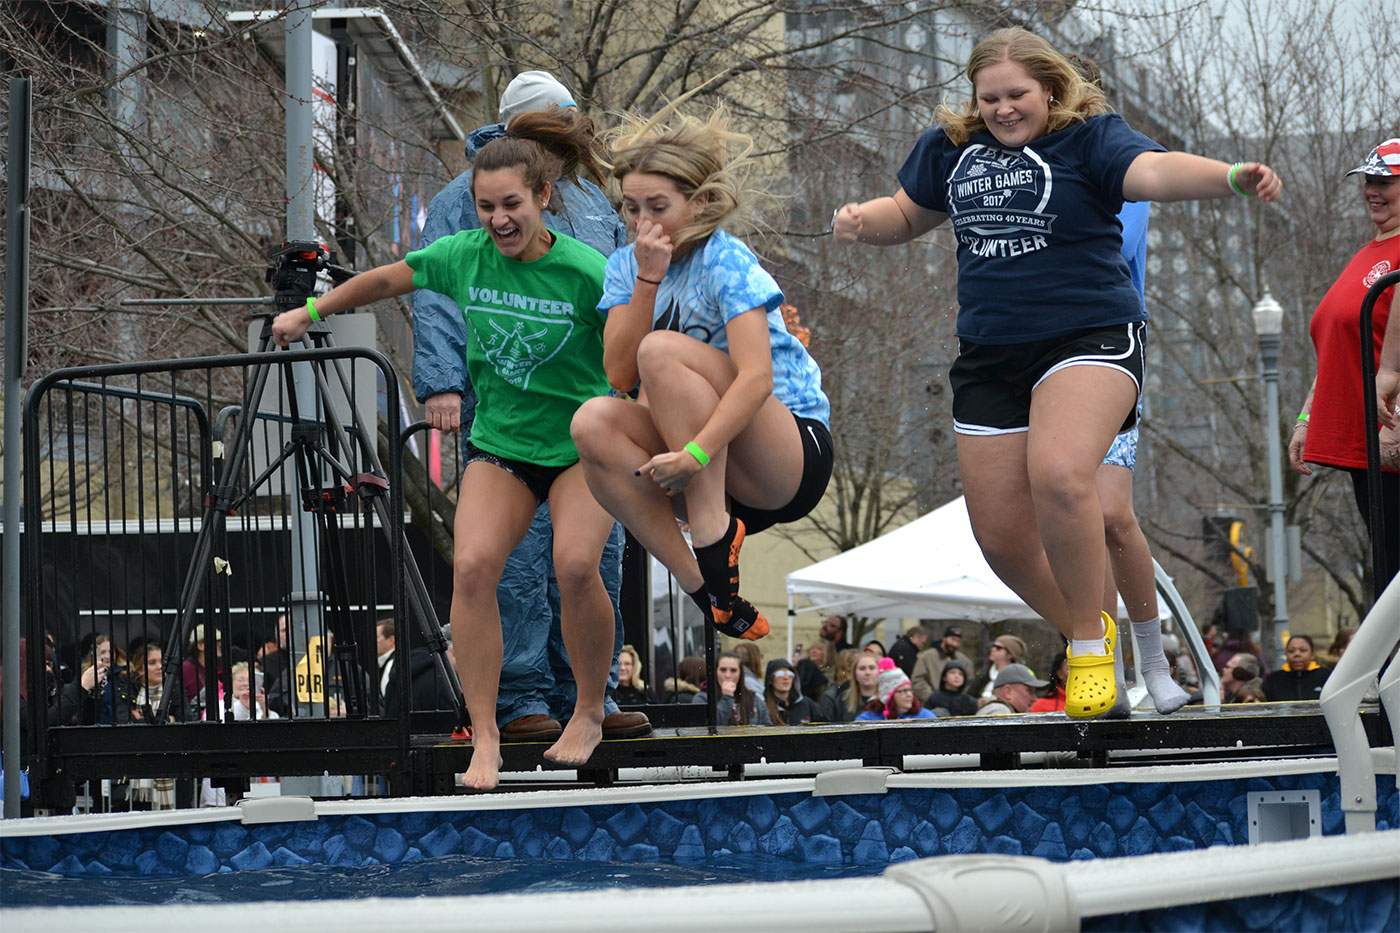 Students jump into a pool of cold water at the Pittsburgh Polar Plunge